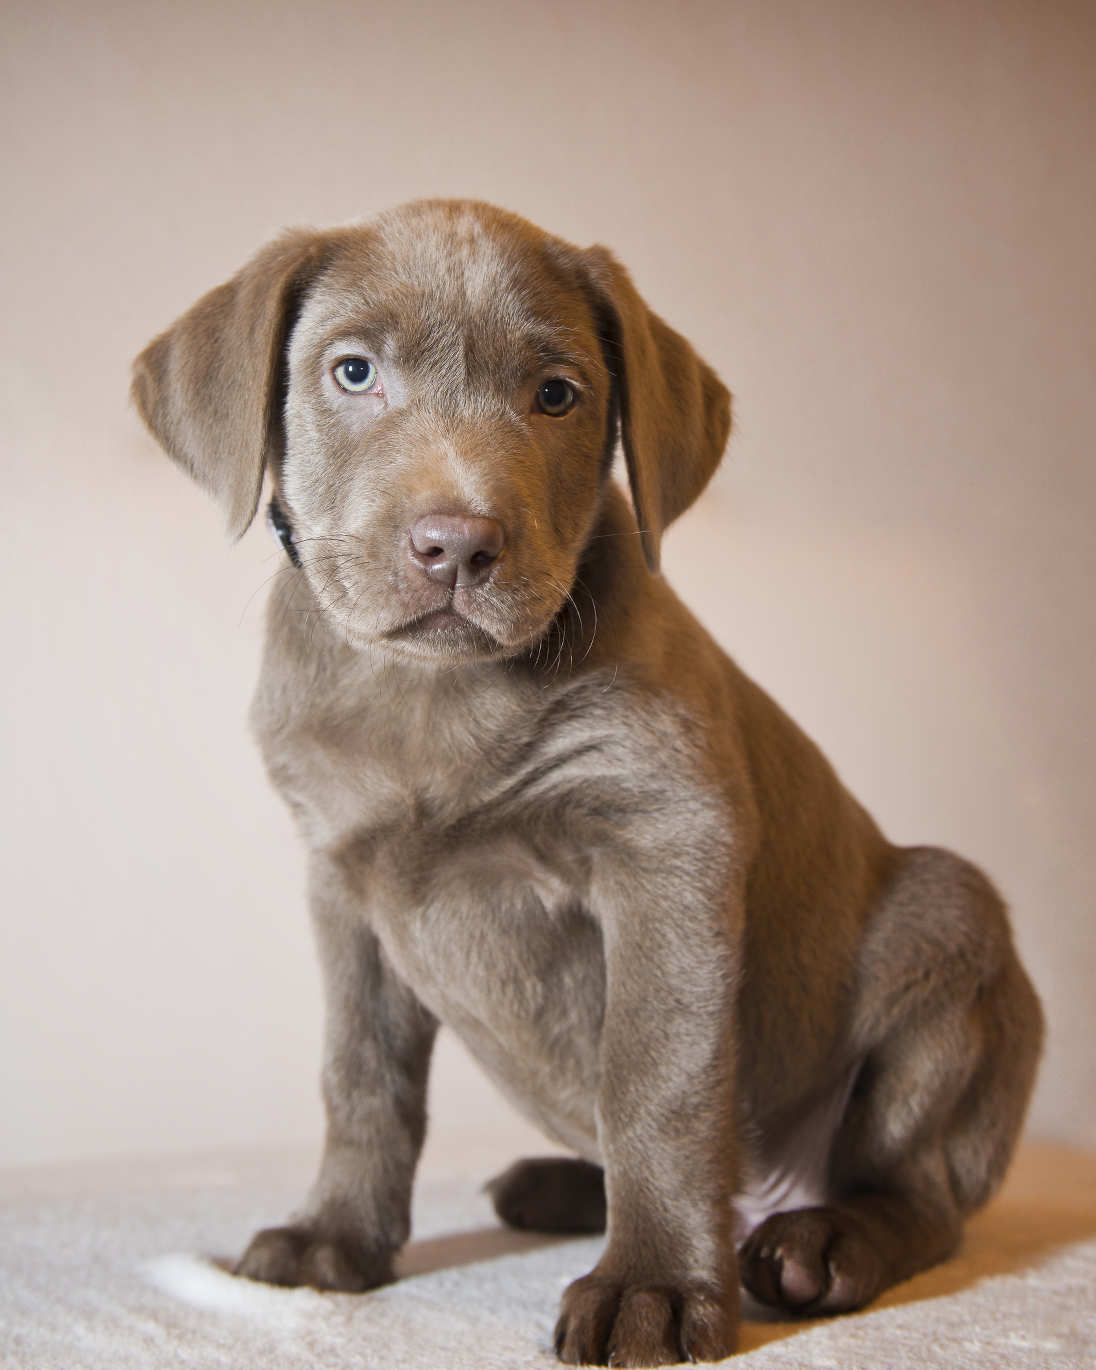 What are some traits of the silver Labrador?